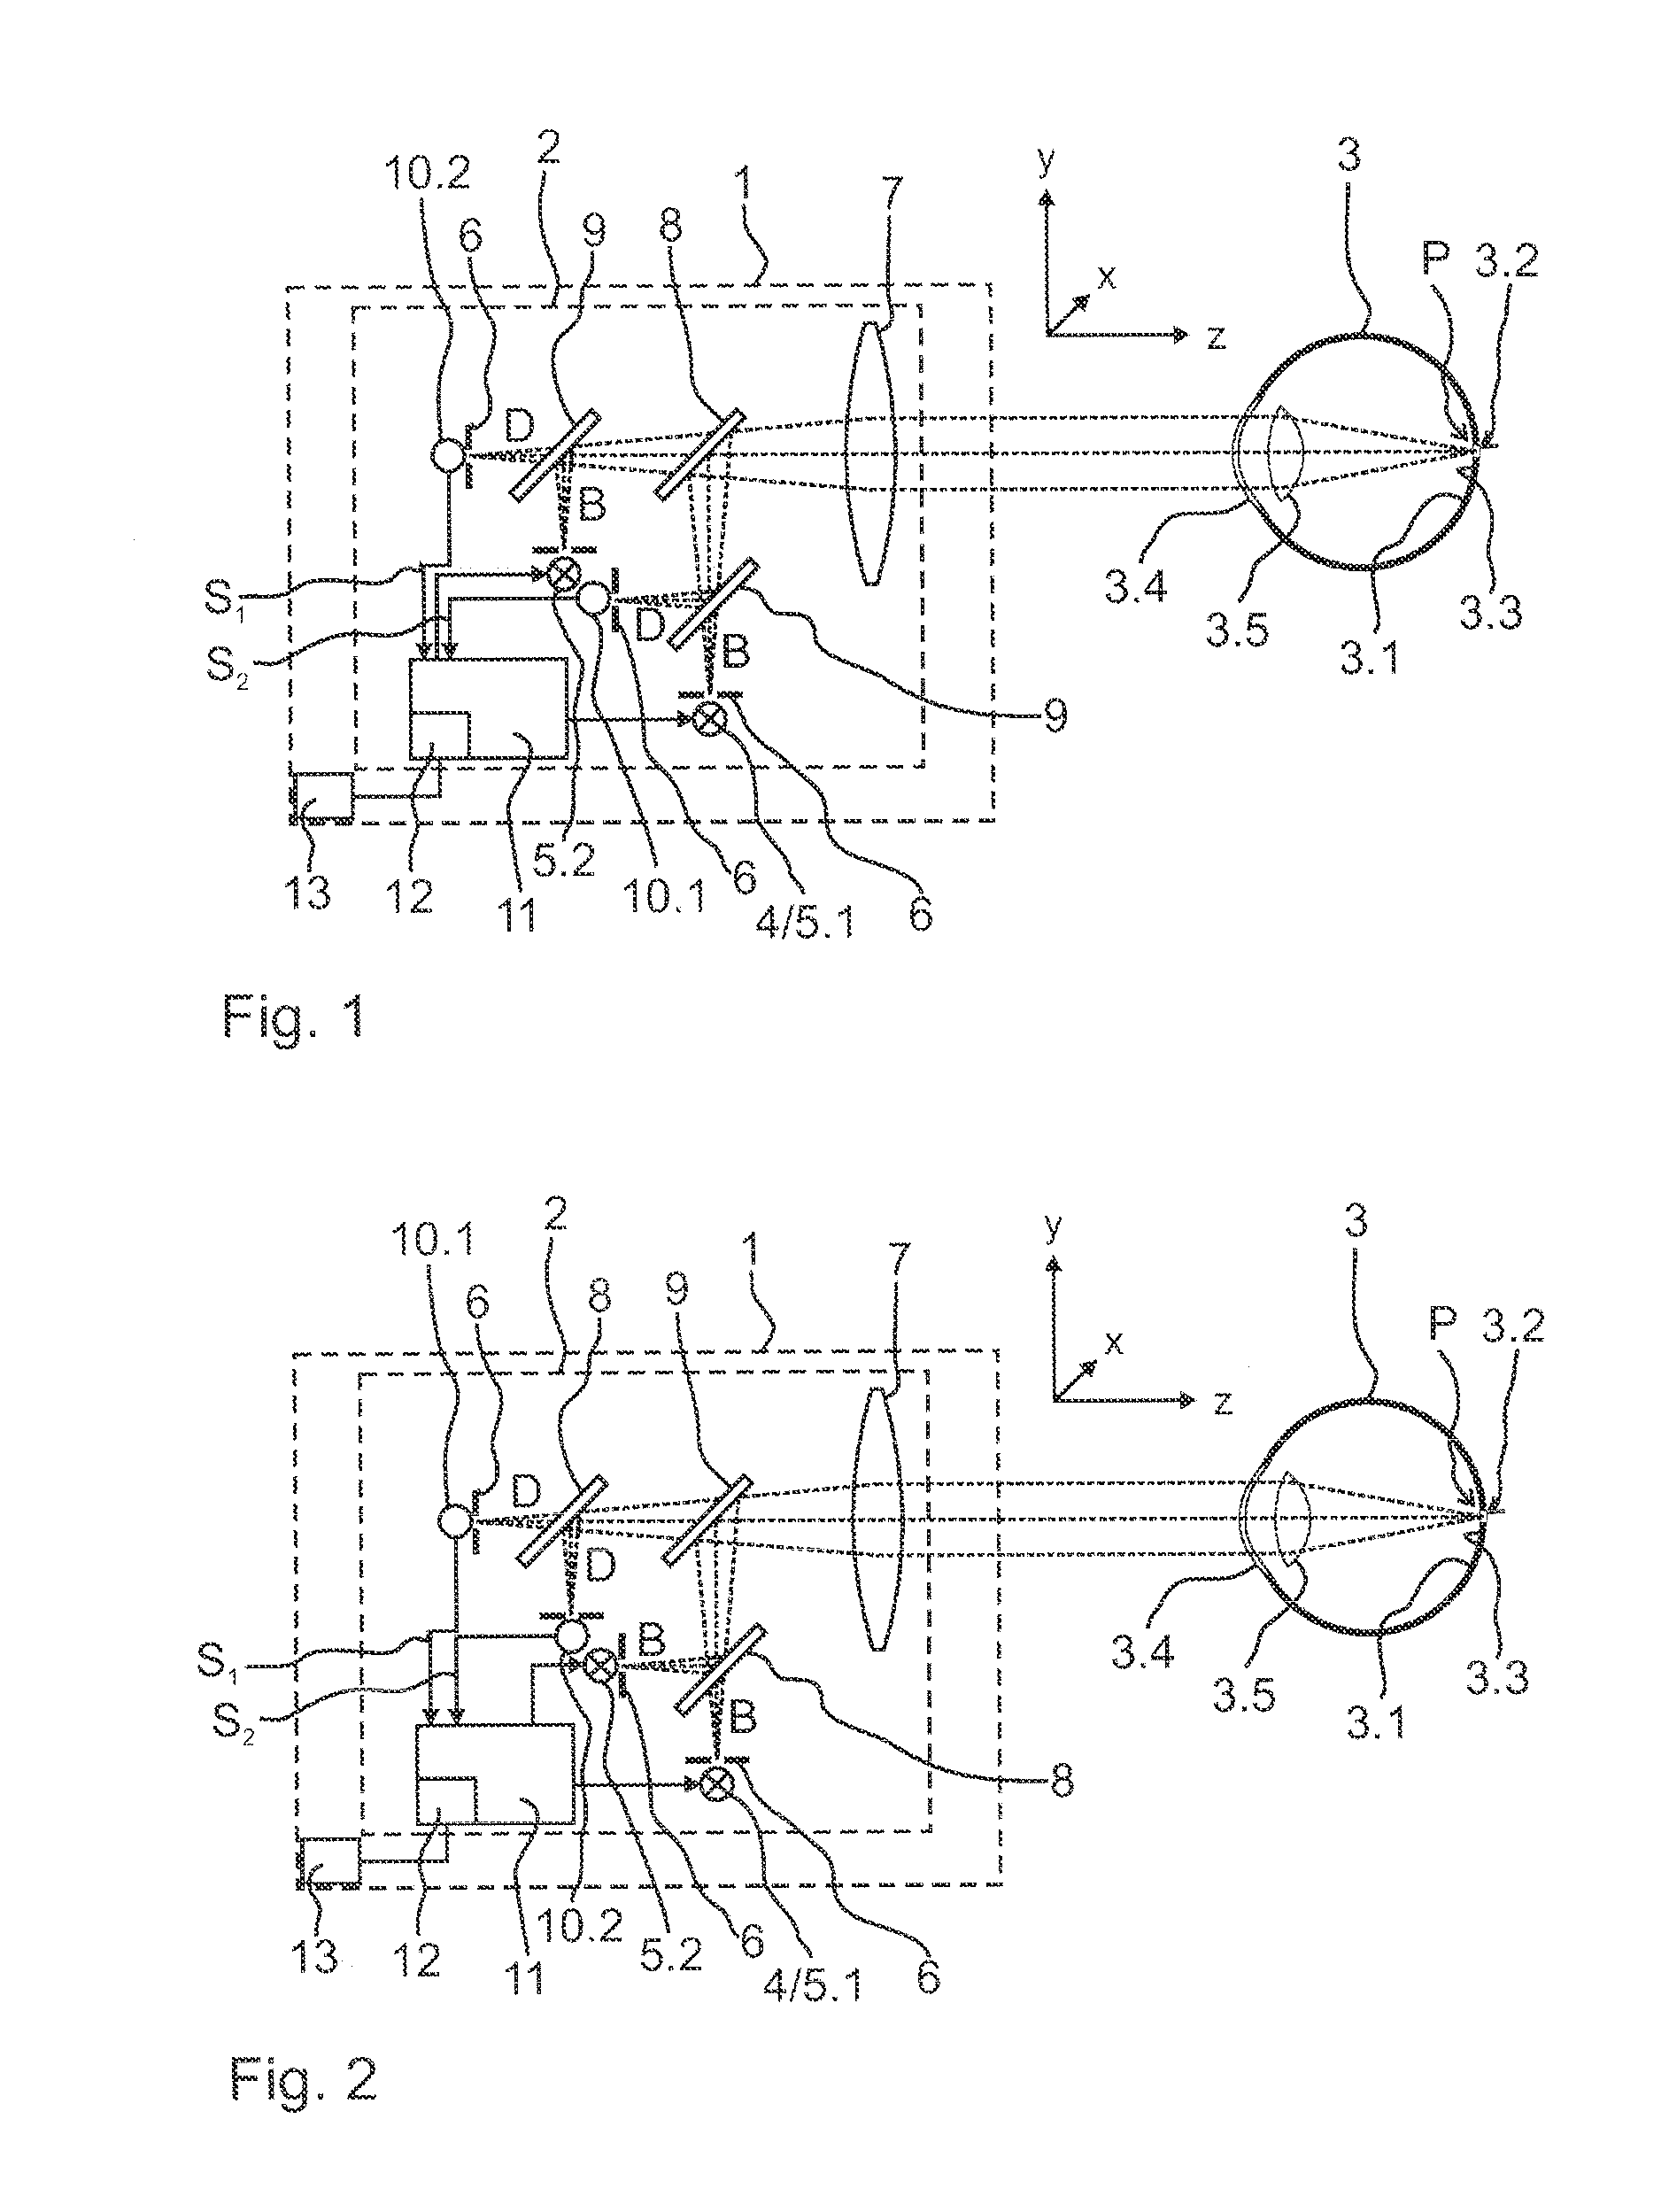 Fixation control device and method for controlling the fixation of an eye